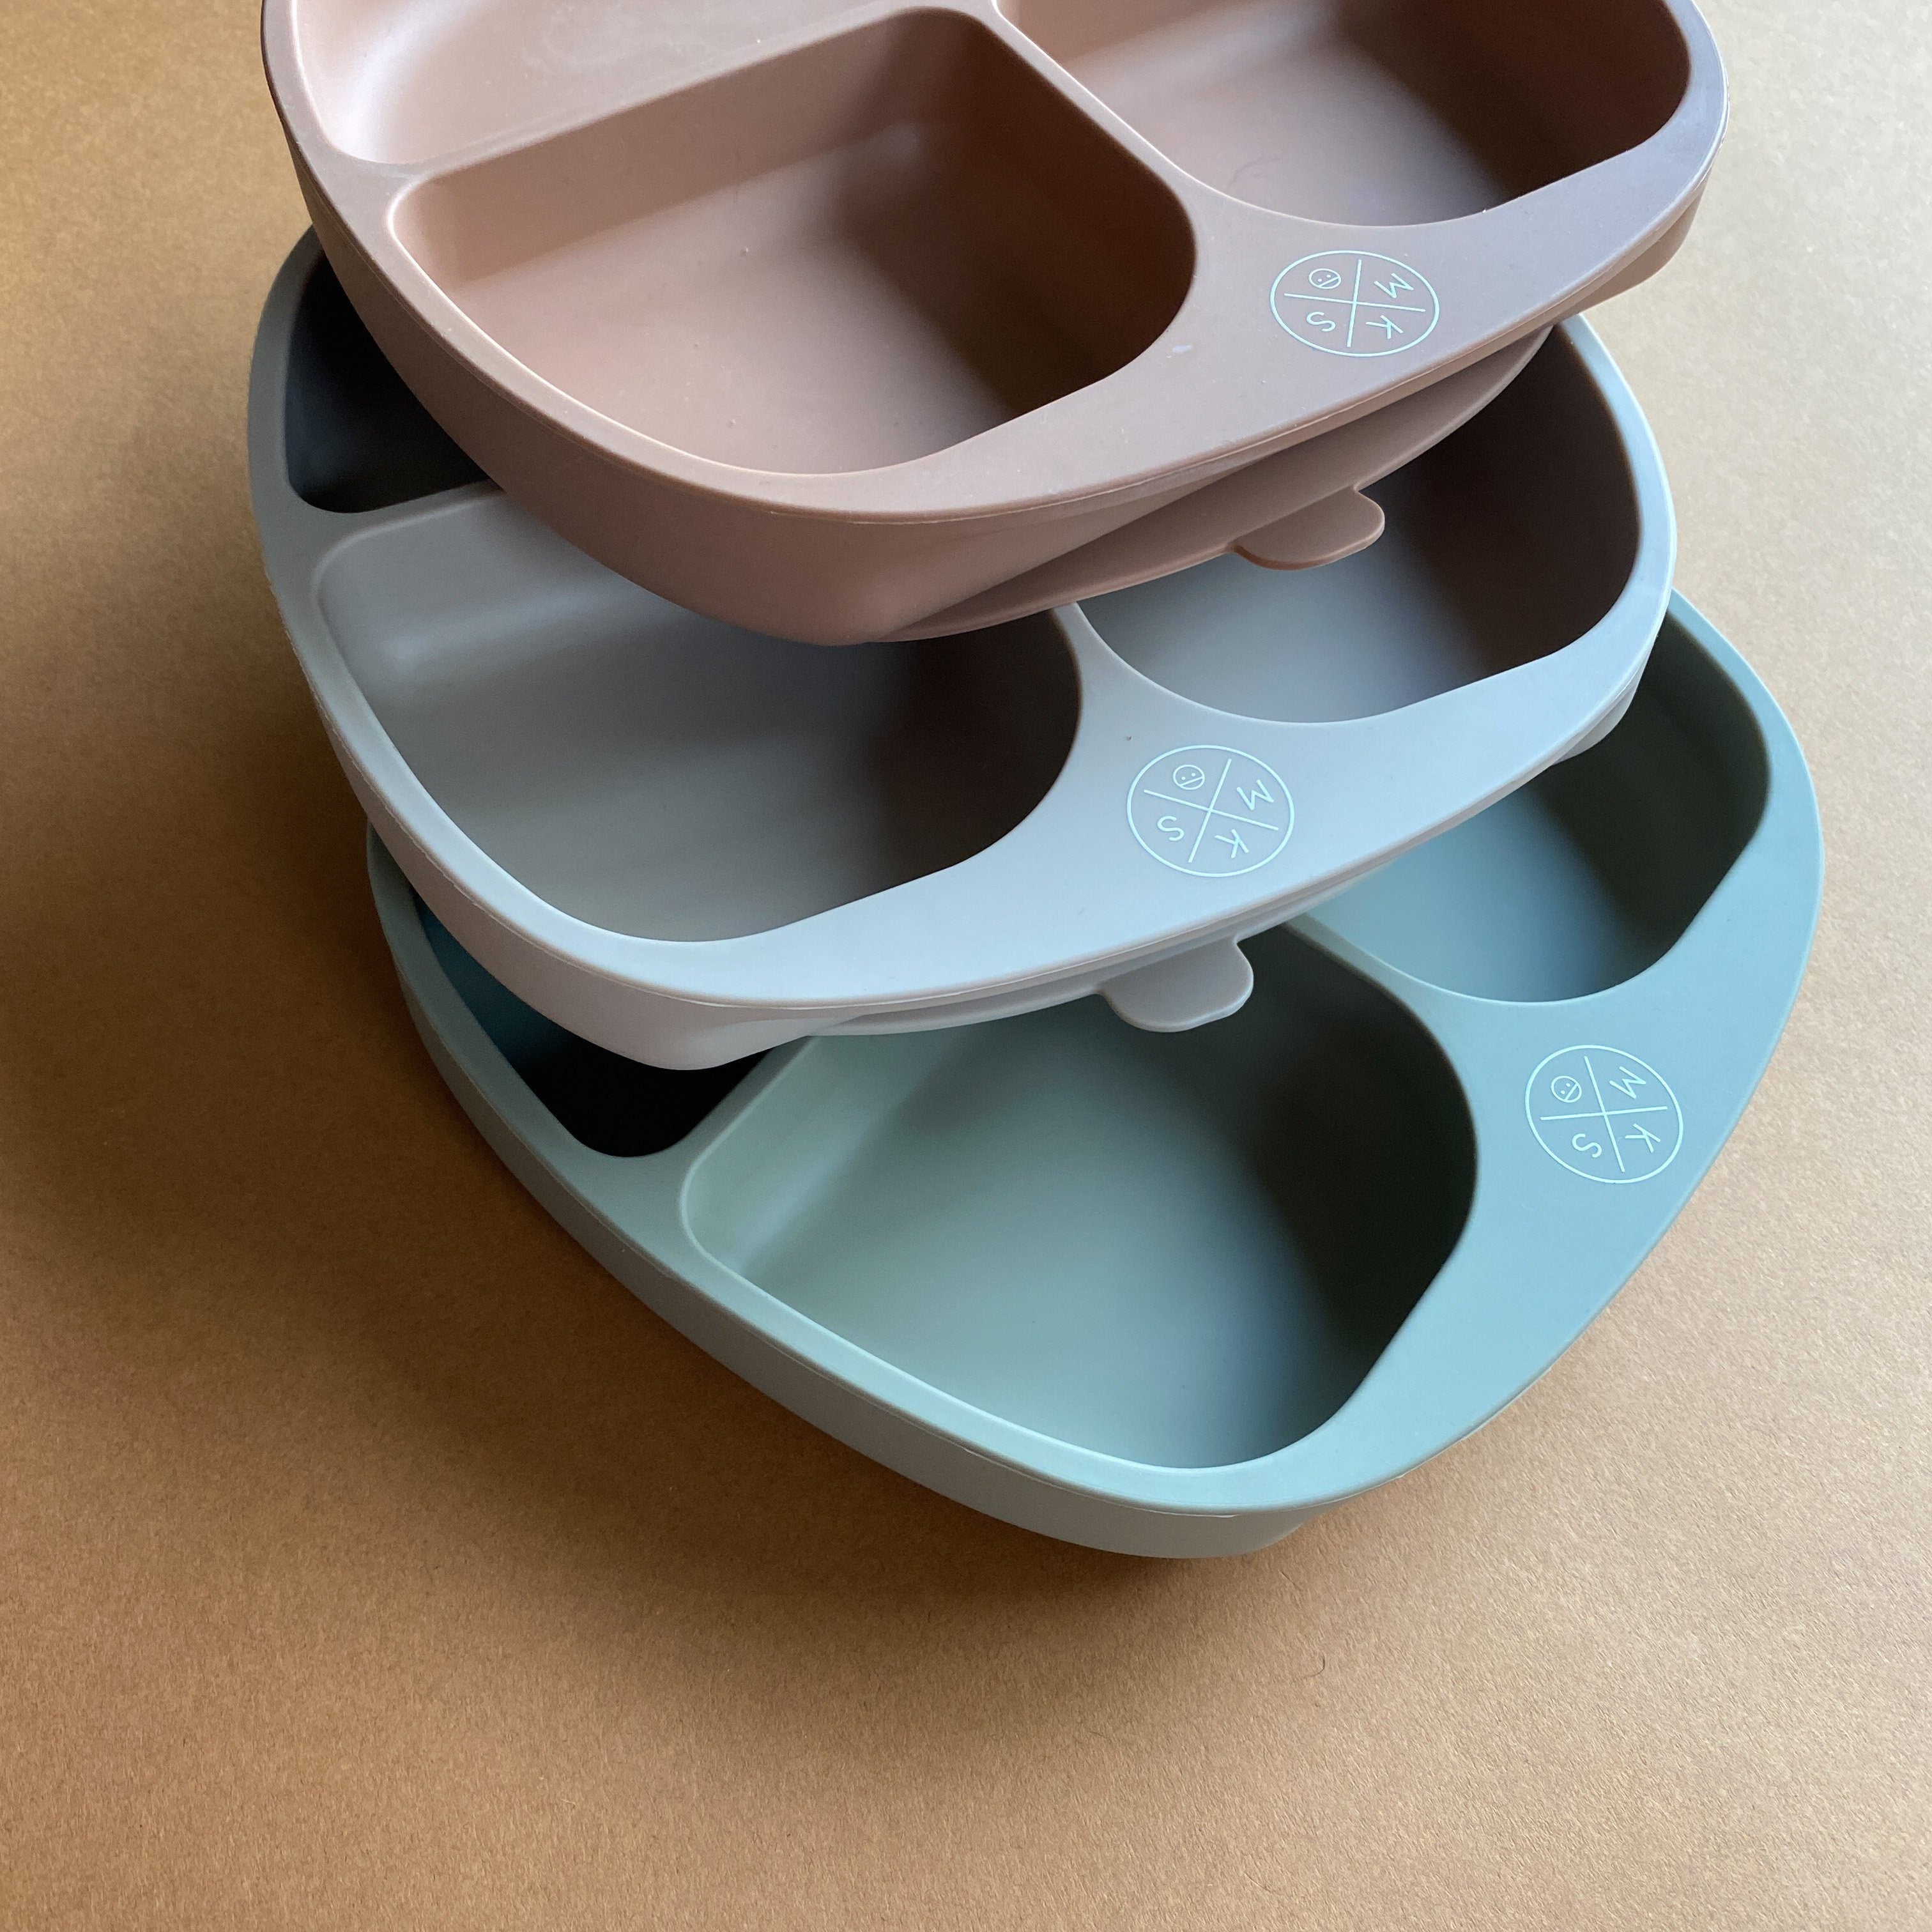 Silicone Suction Plates with Lids